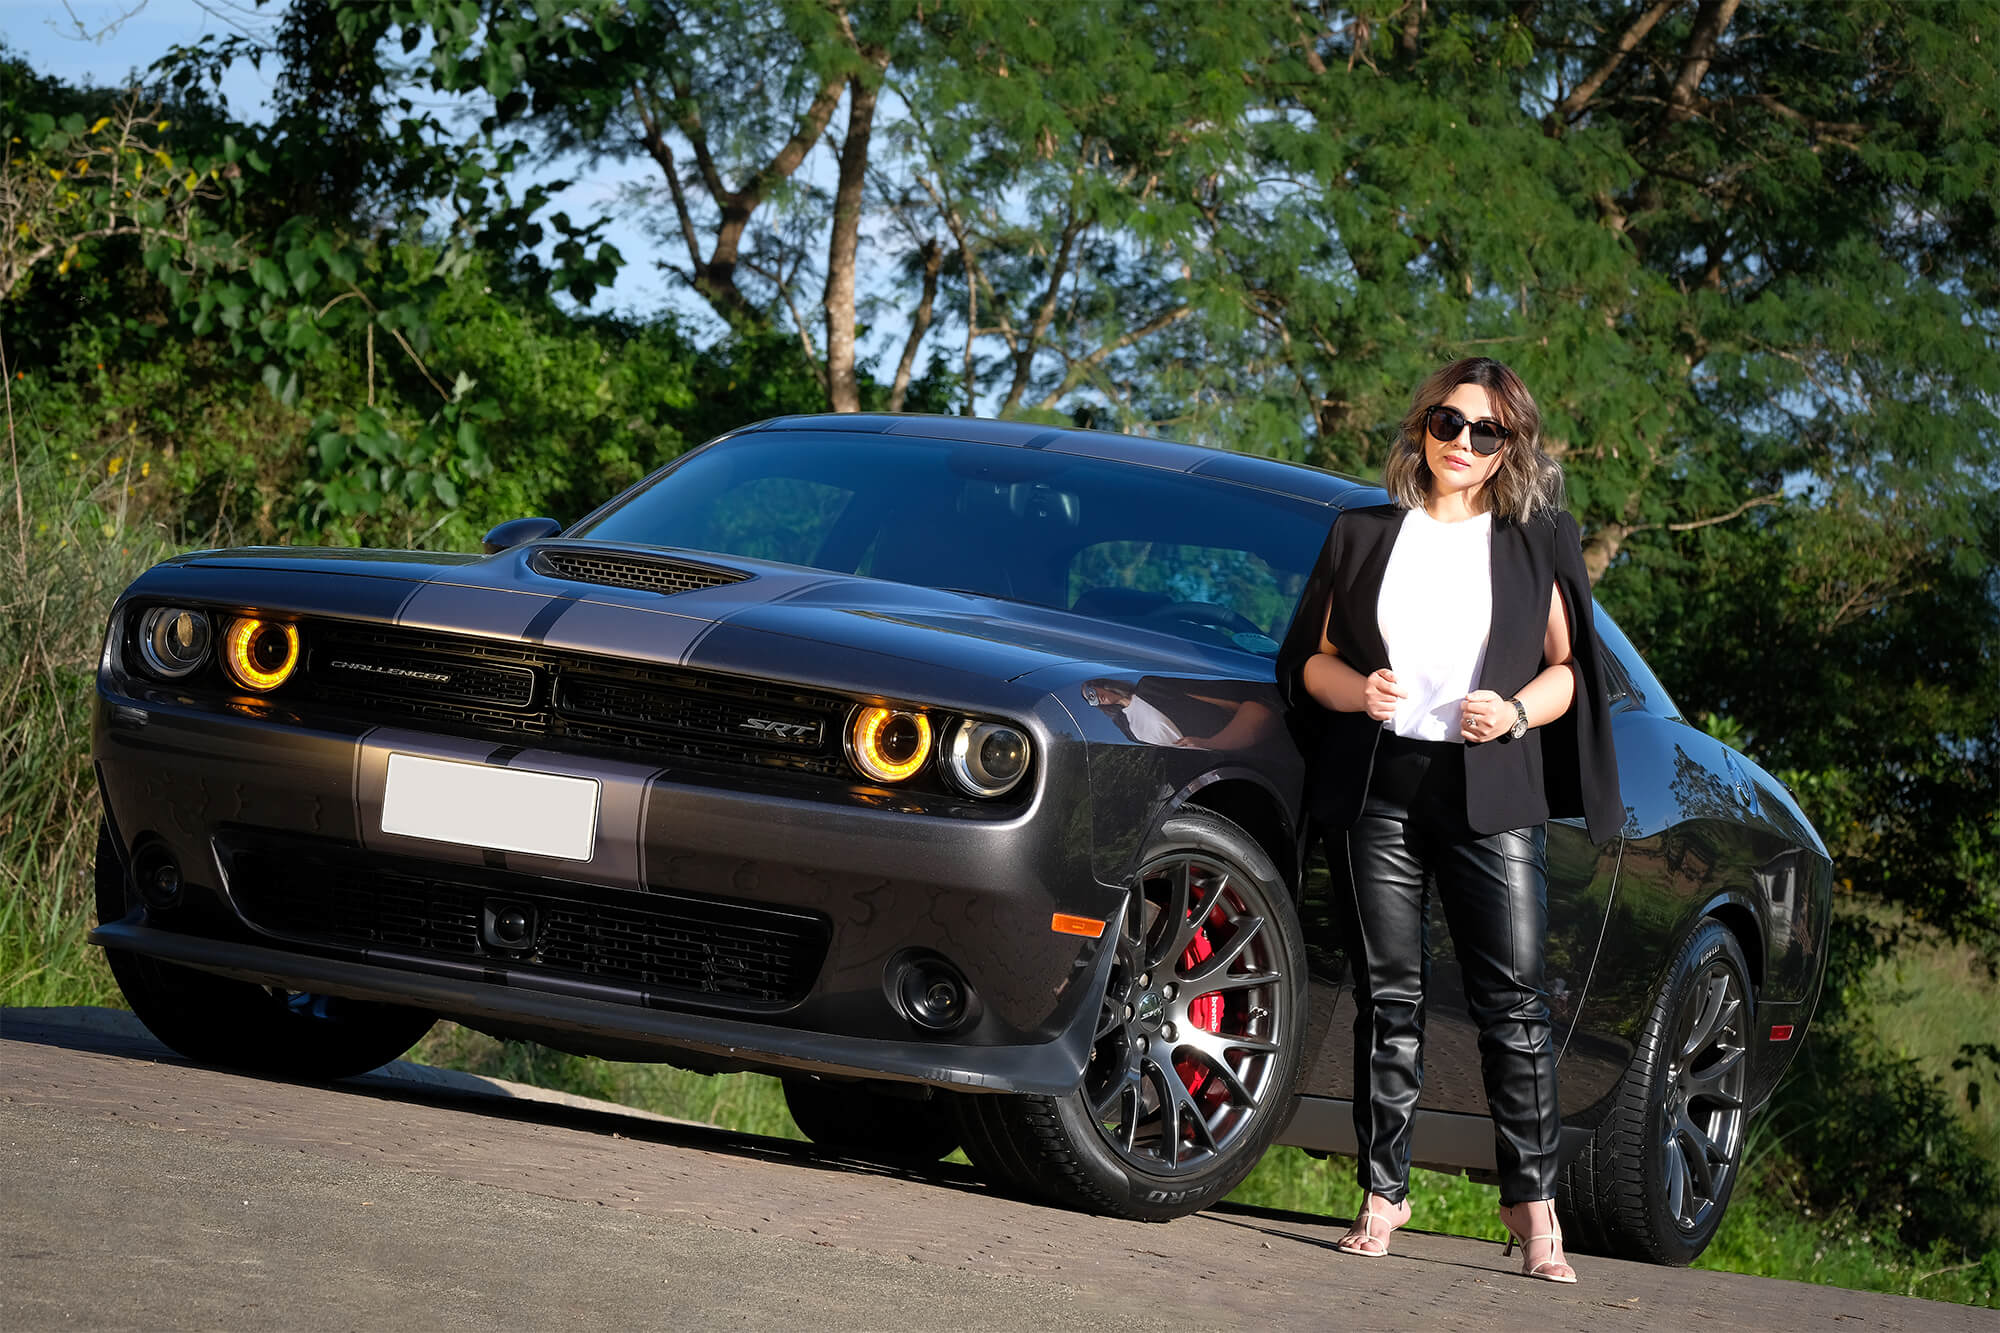 Entrepreneur Amabel Ruiz goes to work (and play) in her Dodge Challenger.